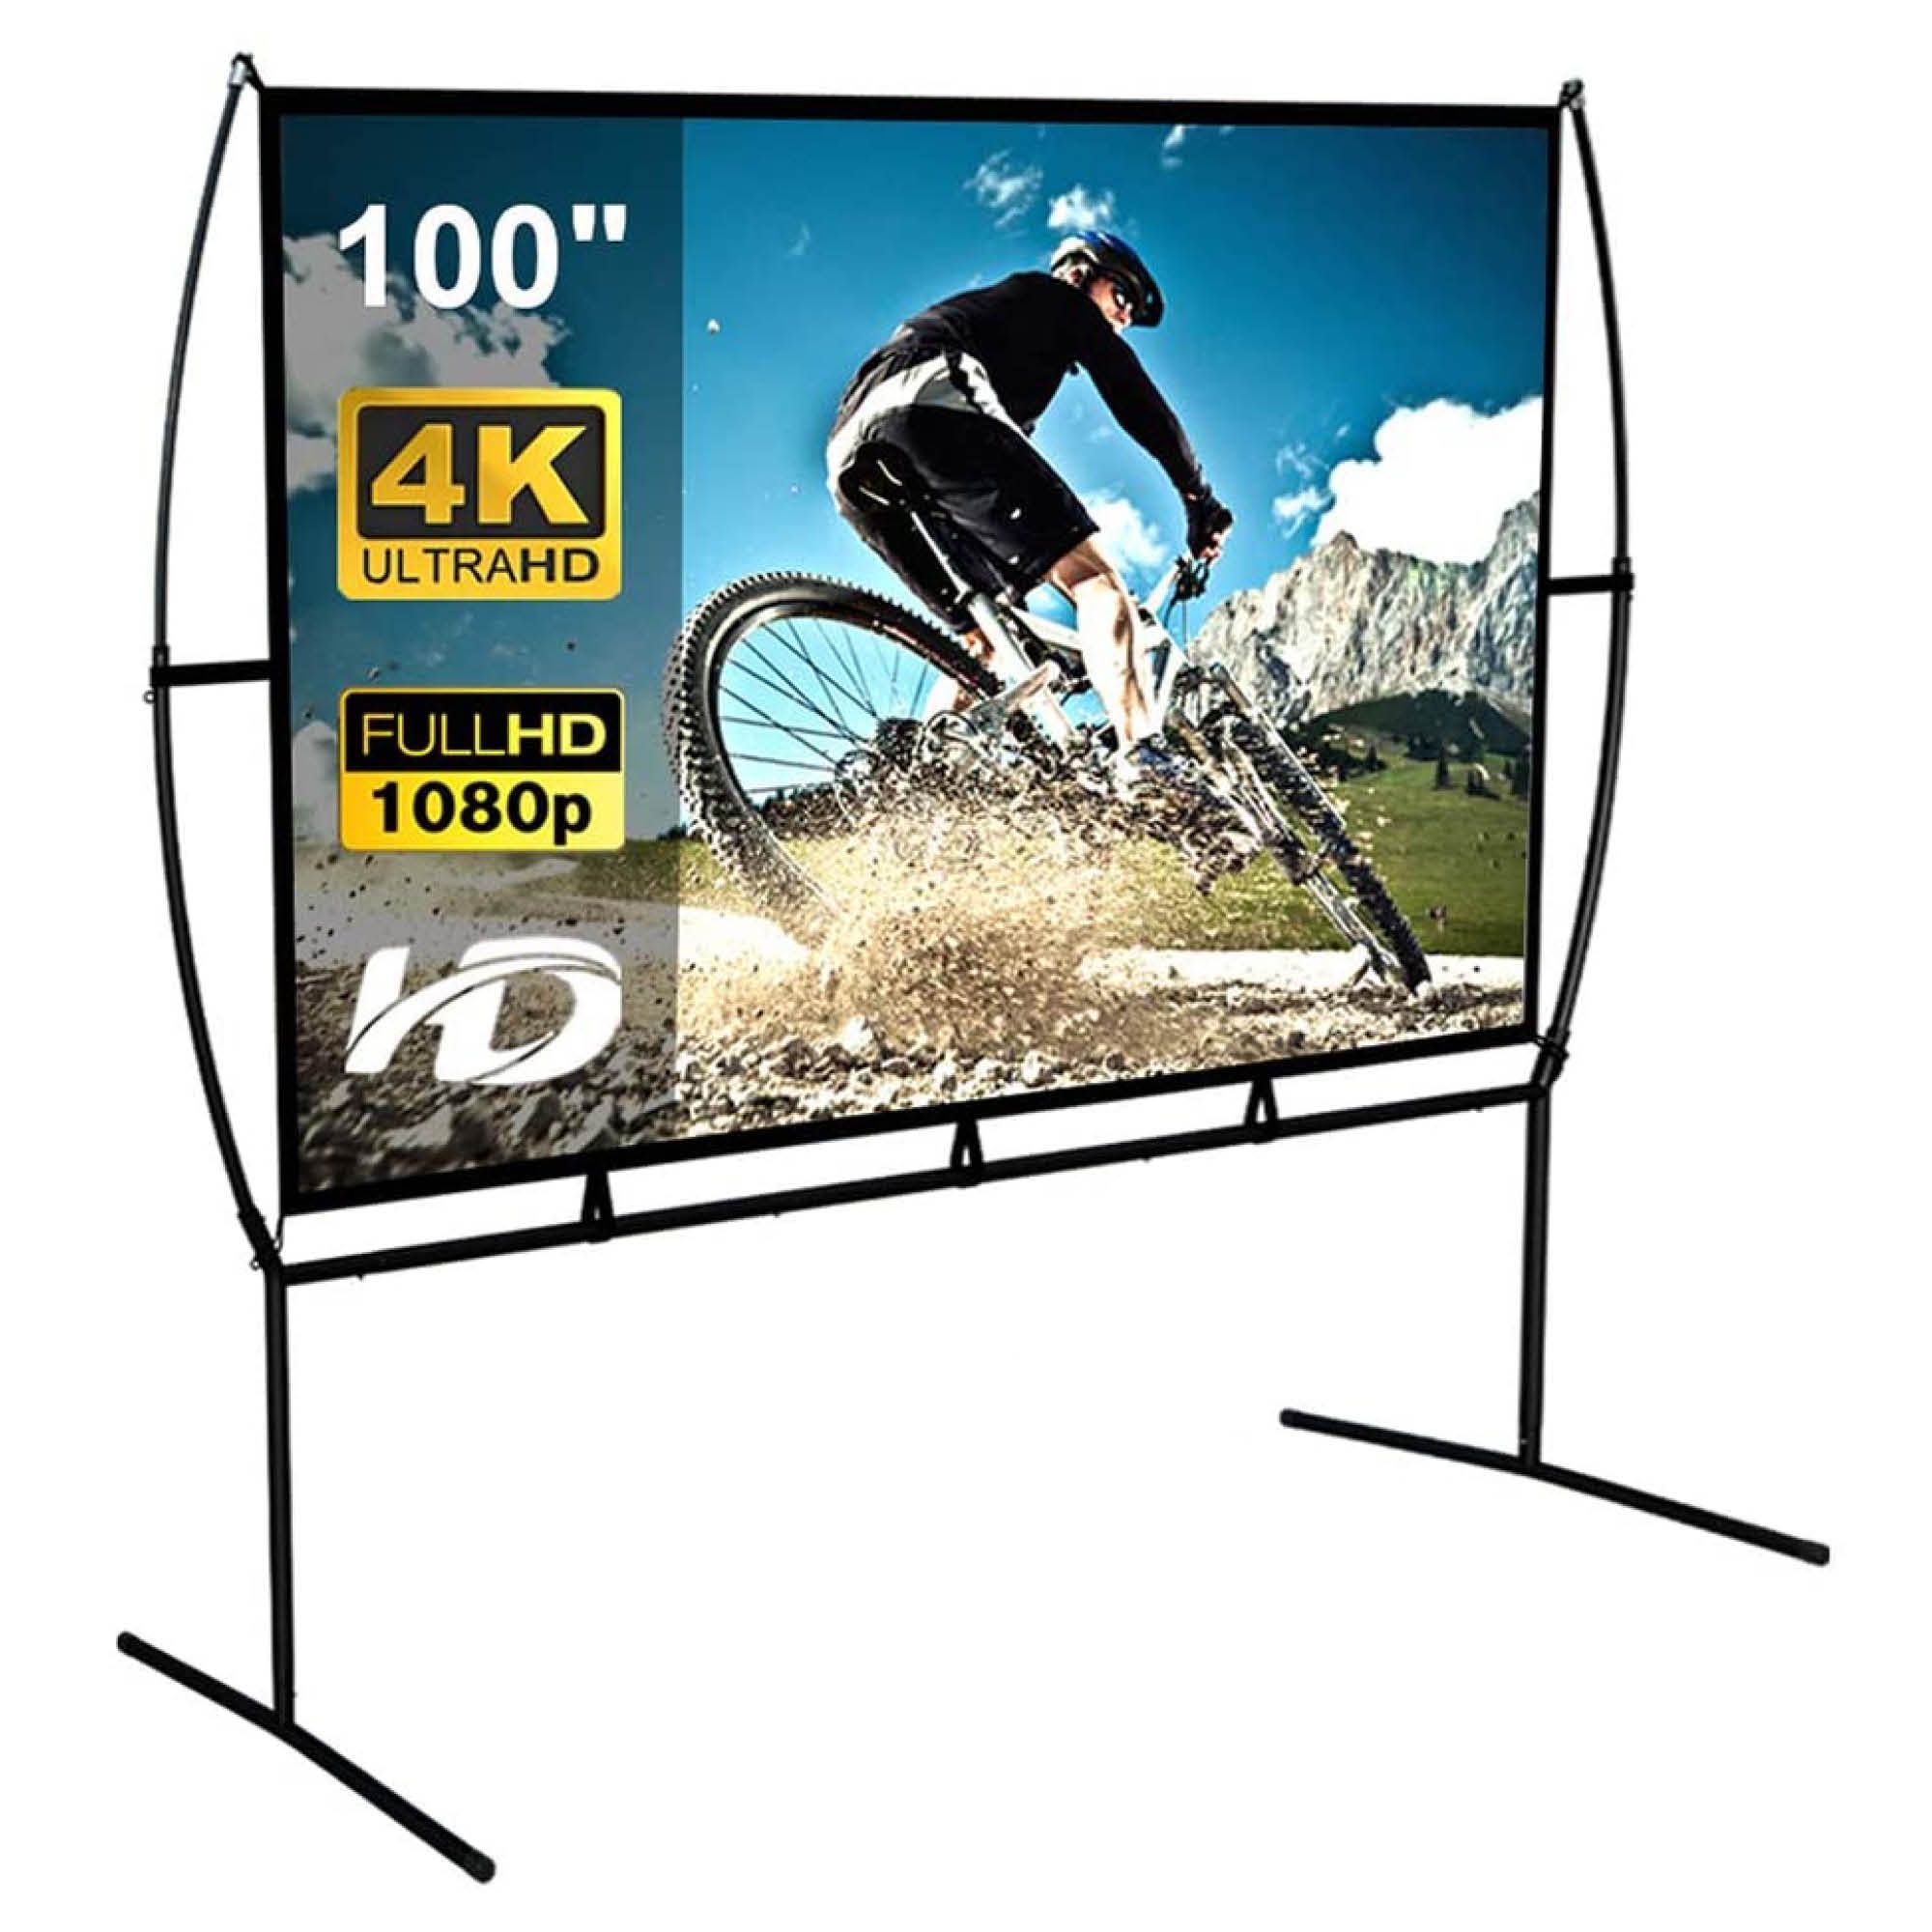 Black PYLE Projector Screen with Stand 100 16:9 HD 4K Portable Lightweight Freestanding Foldable Indoor Outdoor Movie Projection Display with Frame for Home Theater